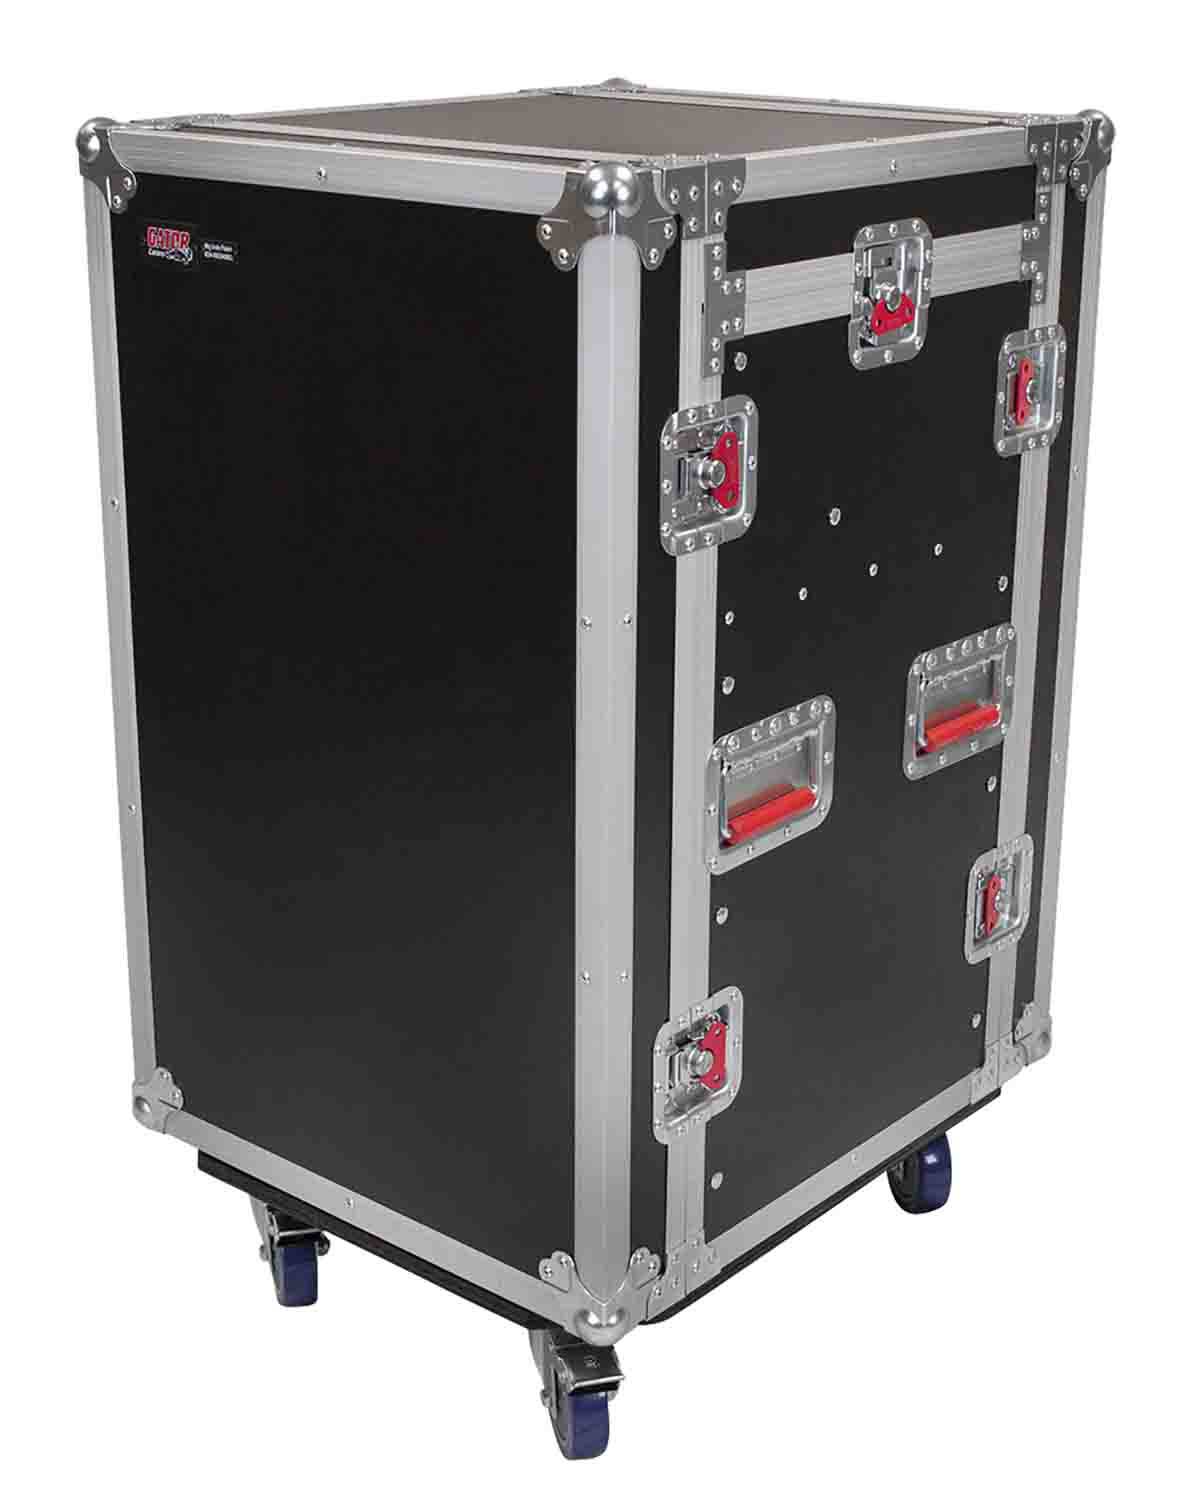 Gator Cases G-TOUR 10X12 PU, 10U Top 12U Side Console Rack Case with Casters - Hollywood DJ